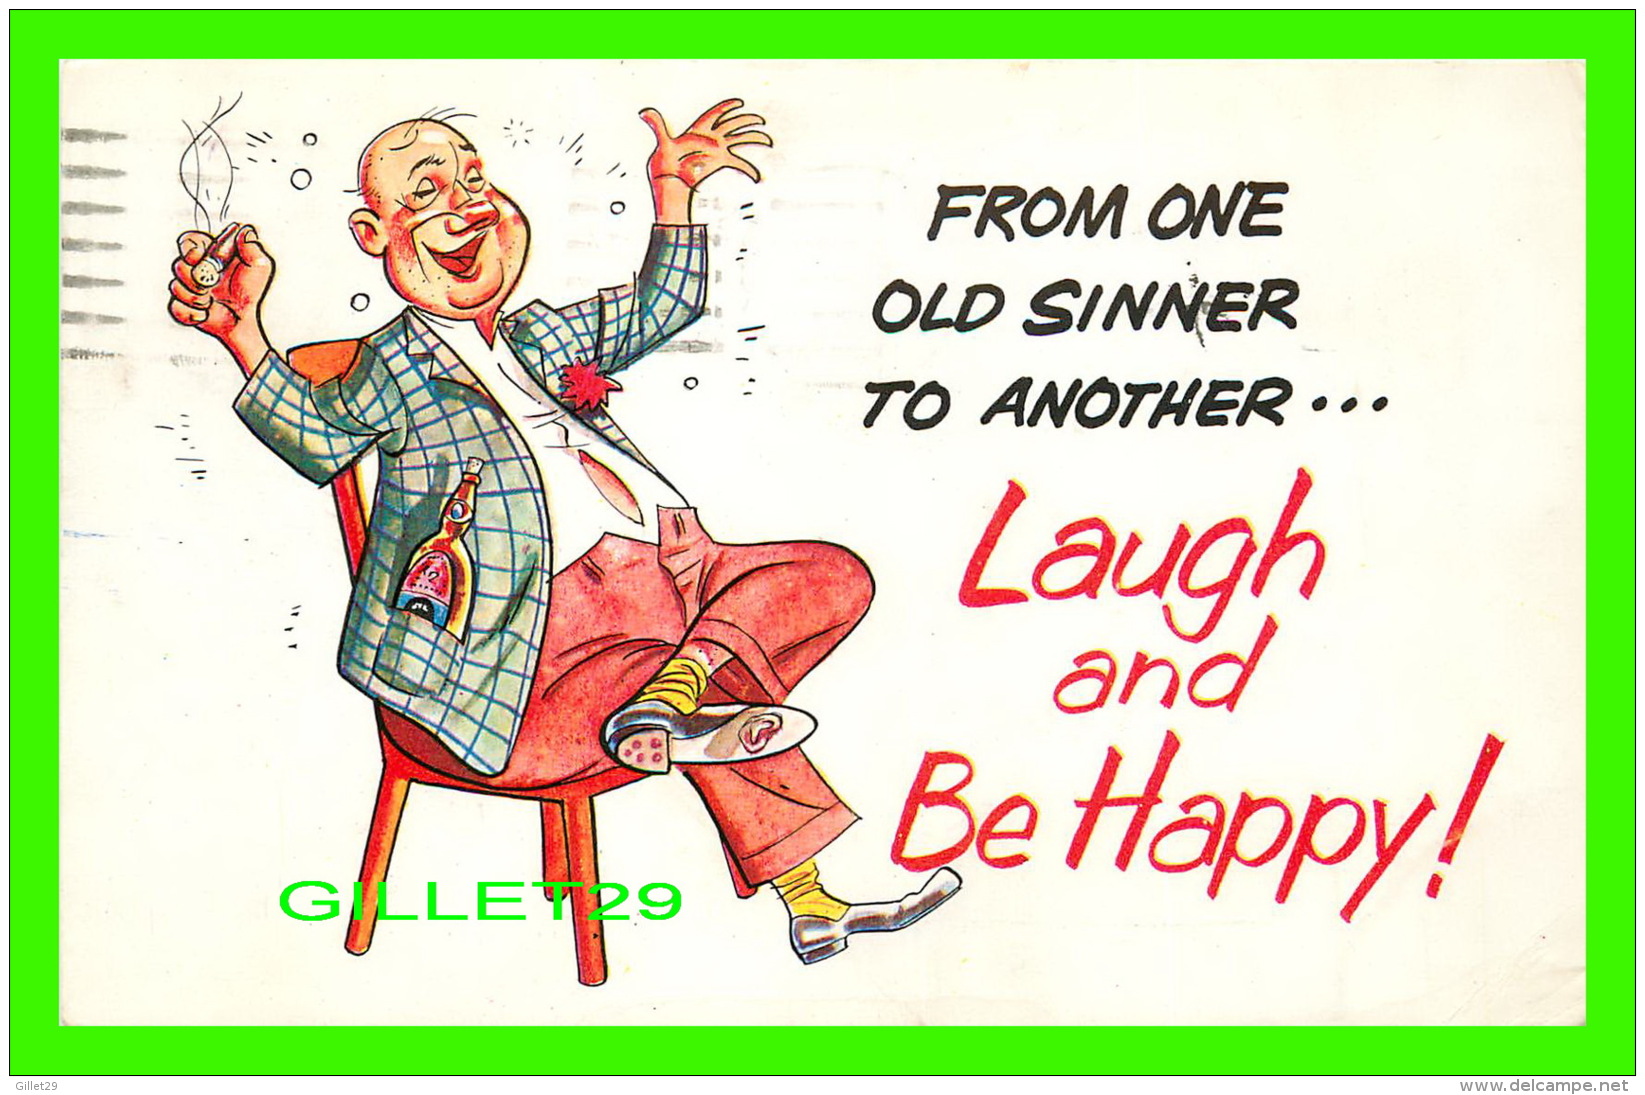 HUMOUR, COMICS - FROM ONE OLD SINNER TO ANOTHER LAUGH AND BE HAPPY ! - TRAVEL IN 1959 - PUB. BY COOPER POSTCARDS CO - - Humor